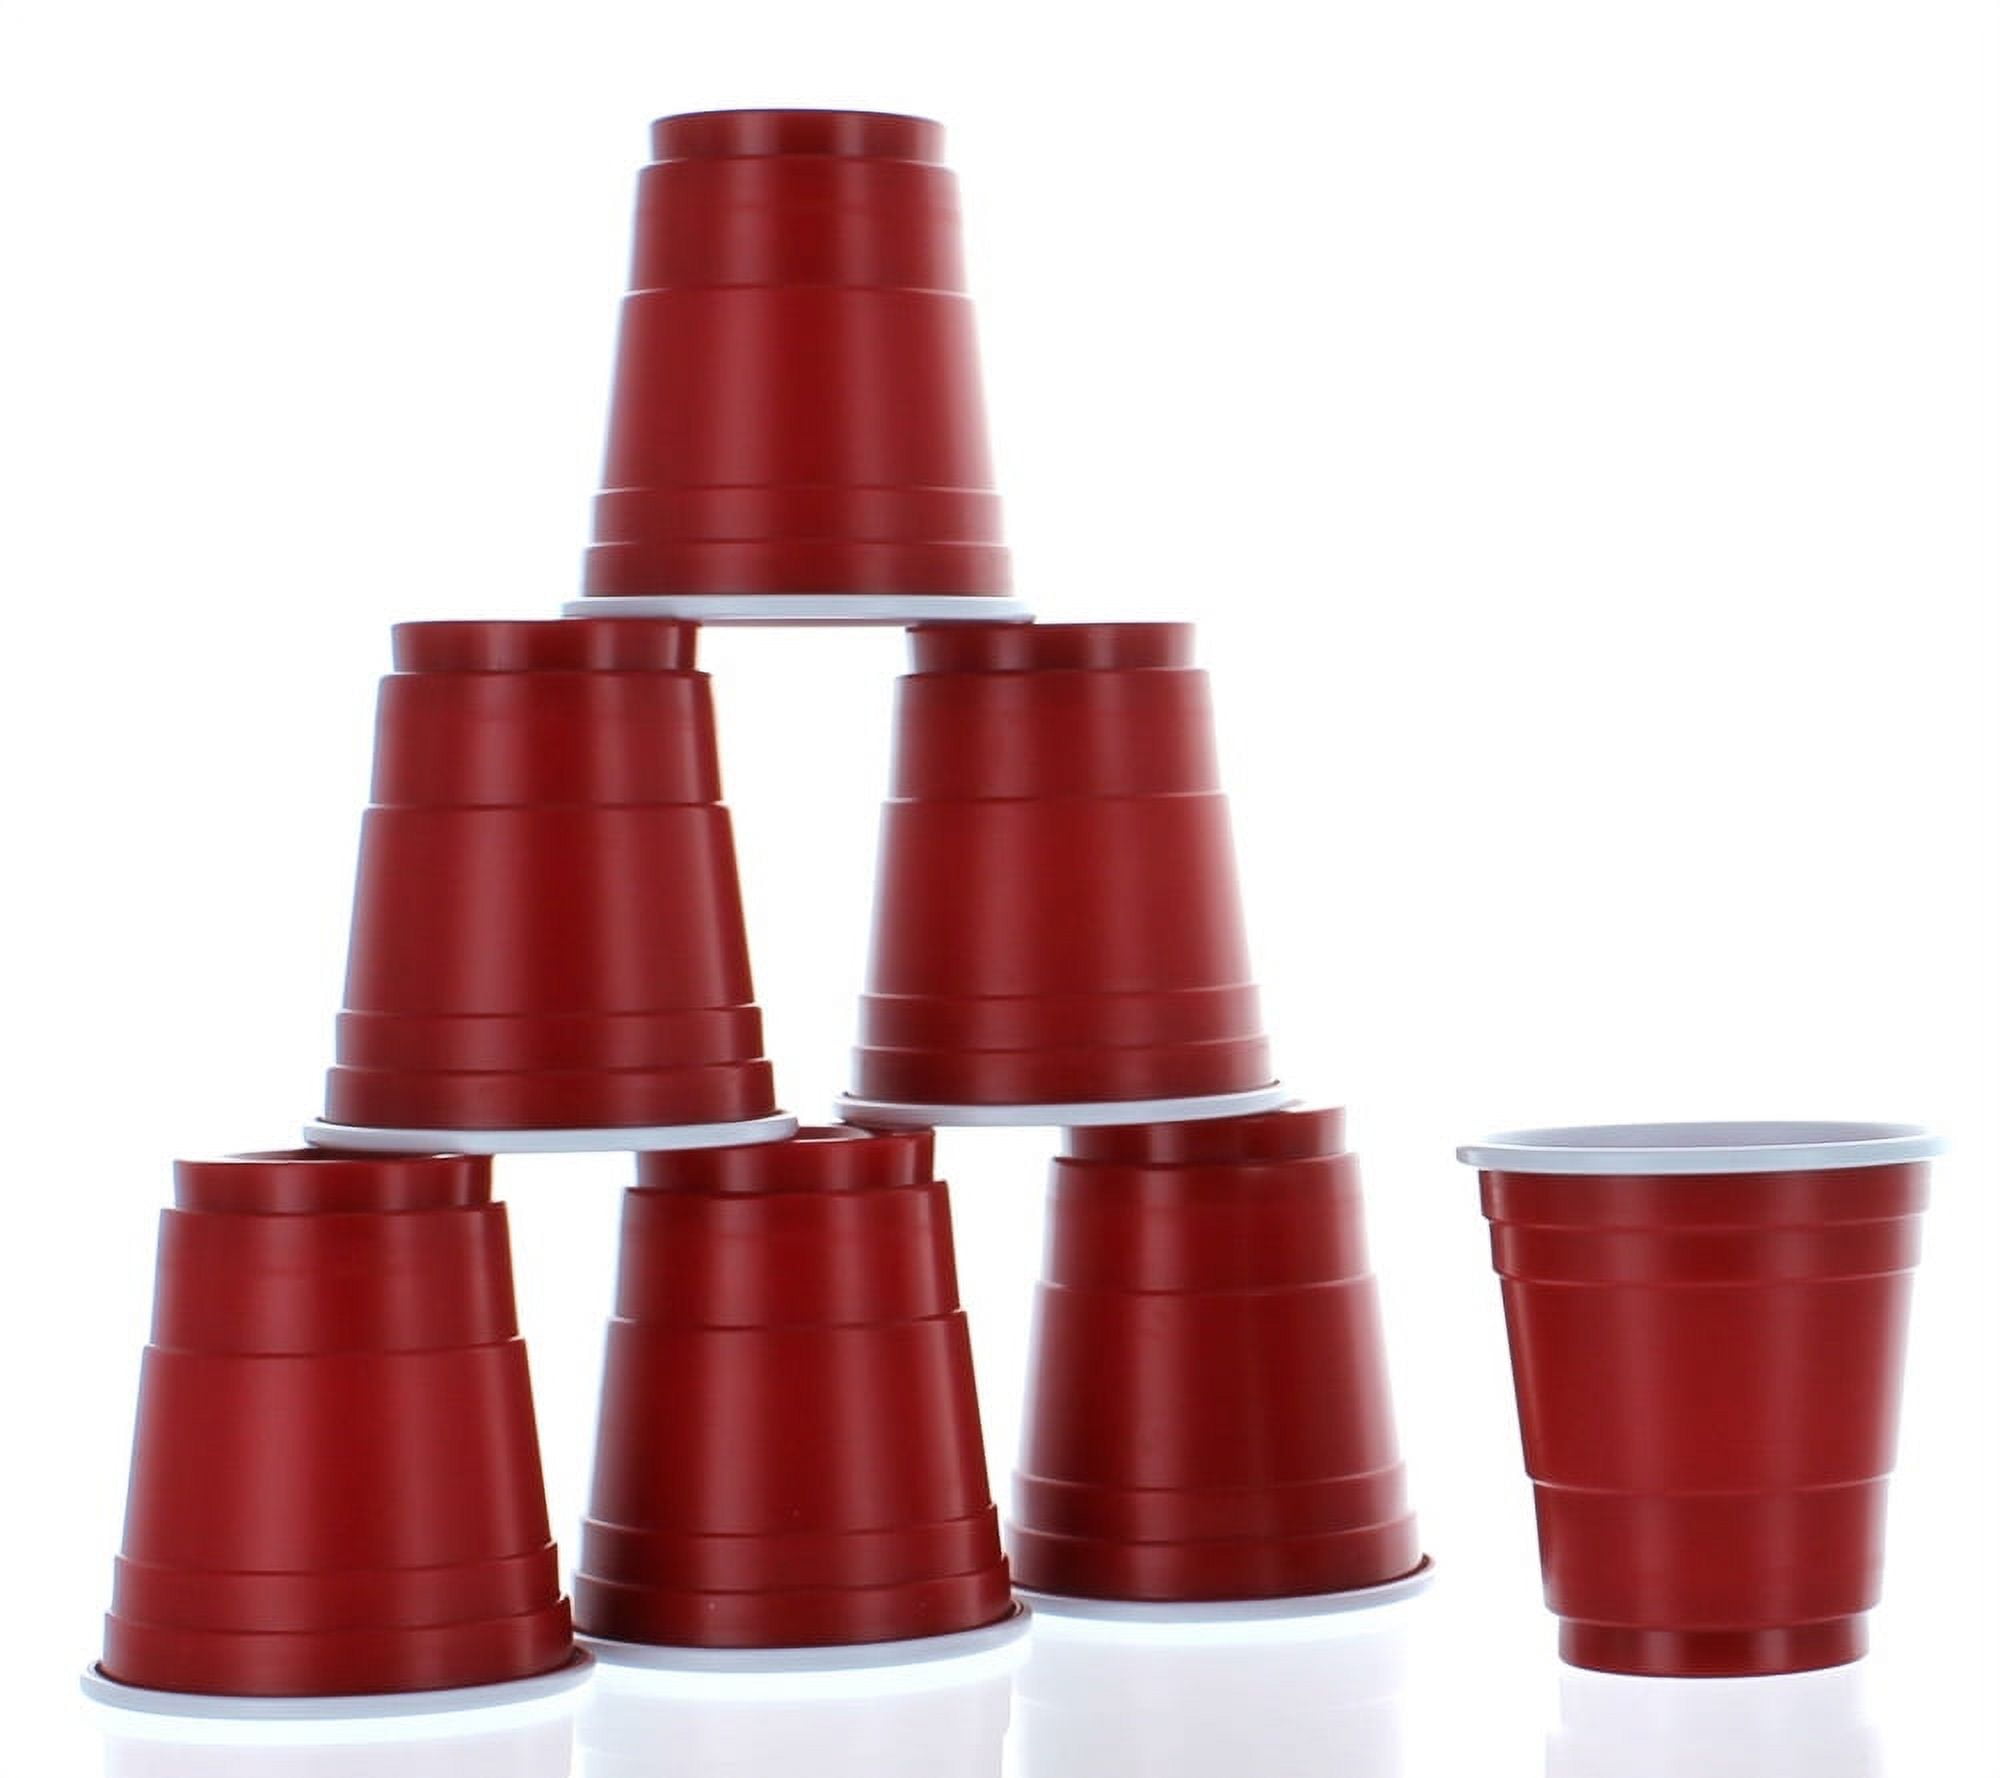 BarY3 2 Ounce Mini Cups, Red, 20 ct